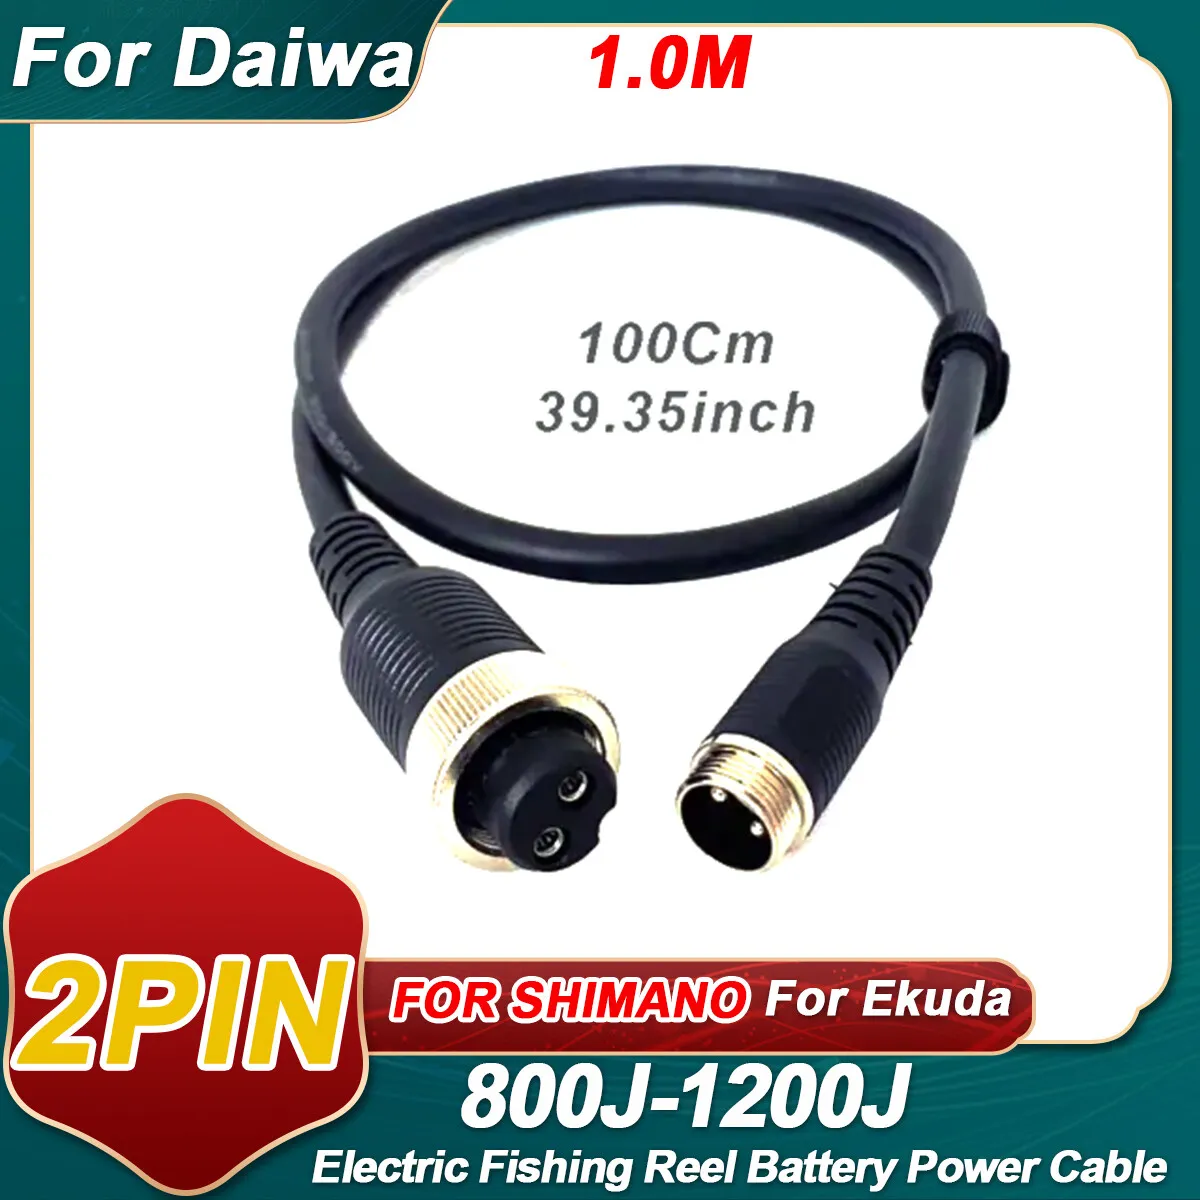 1.0M Power Cable For Daiwa 1200MJ 1200J 800MJ 800MJS Electric Reel